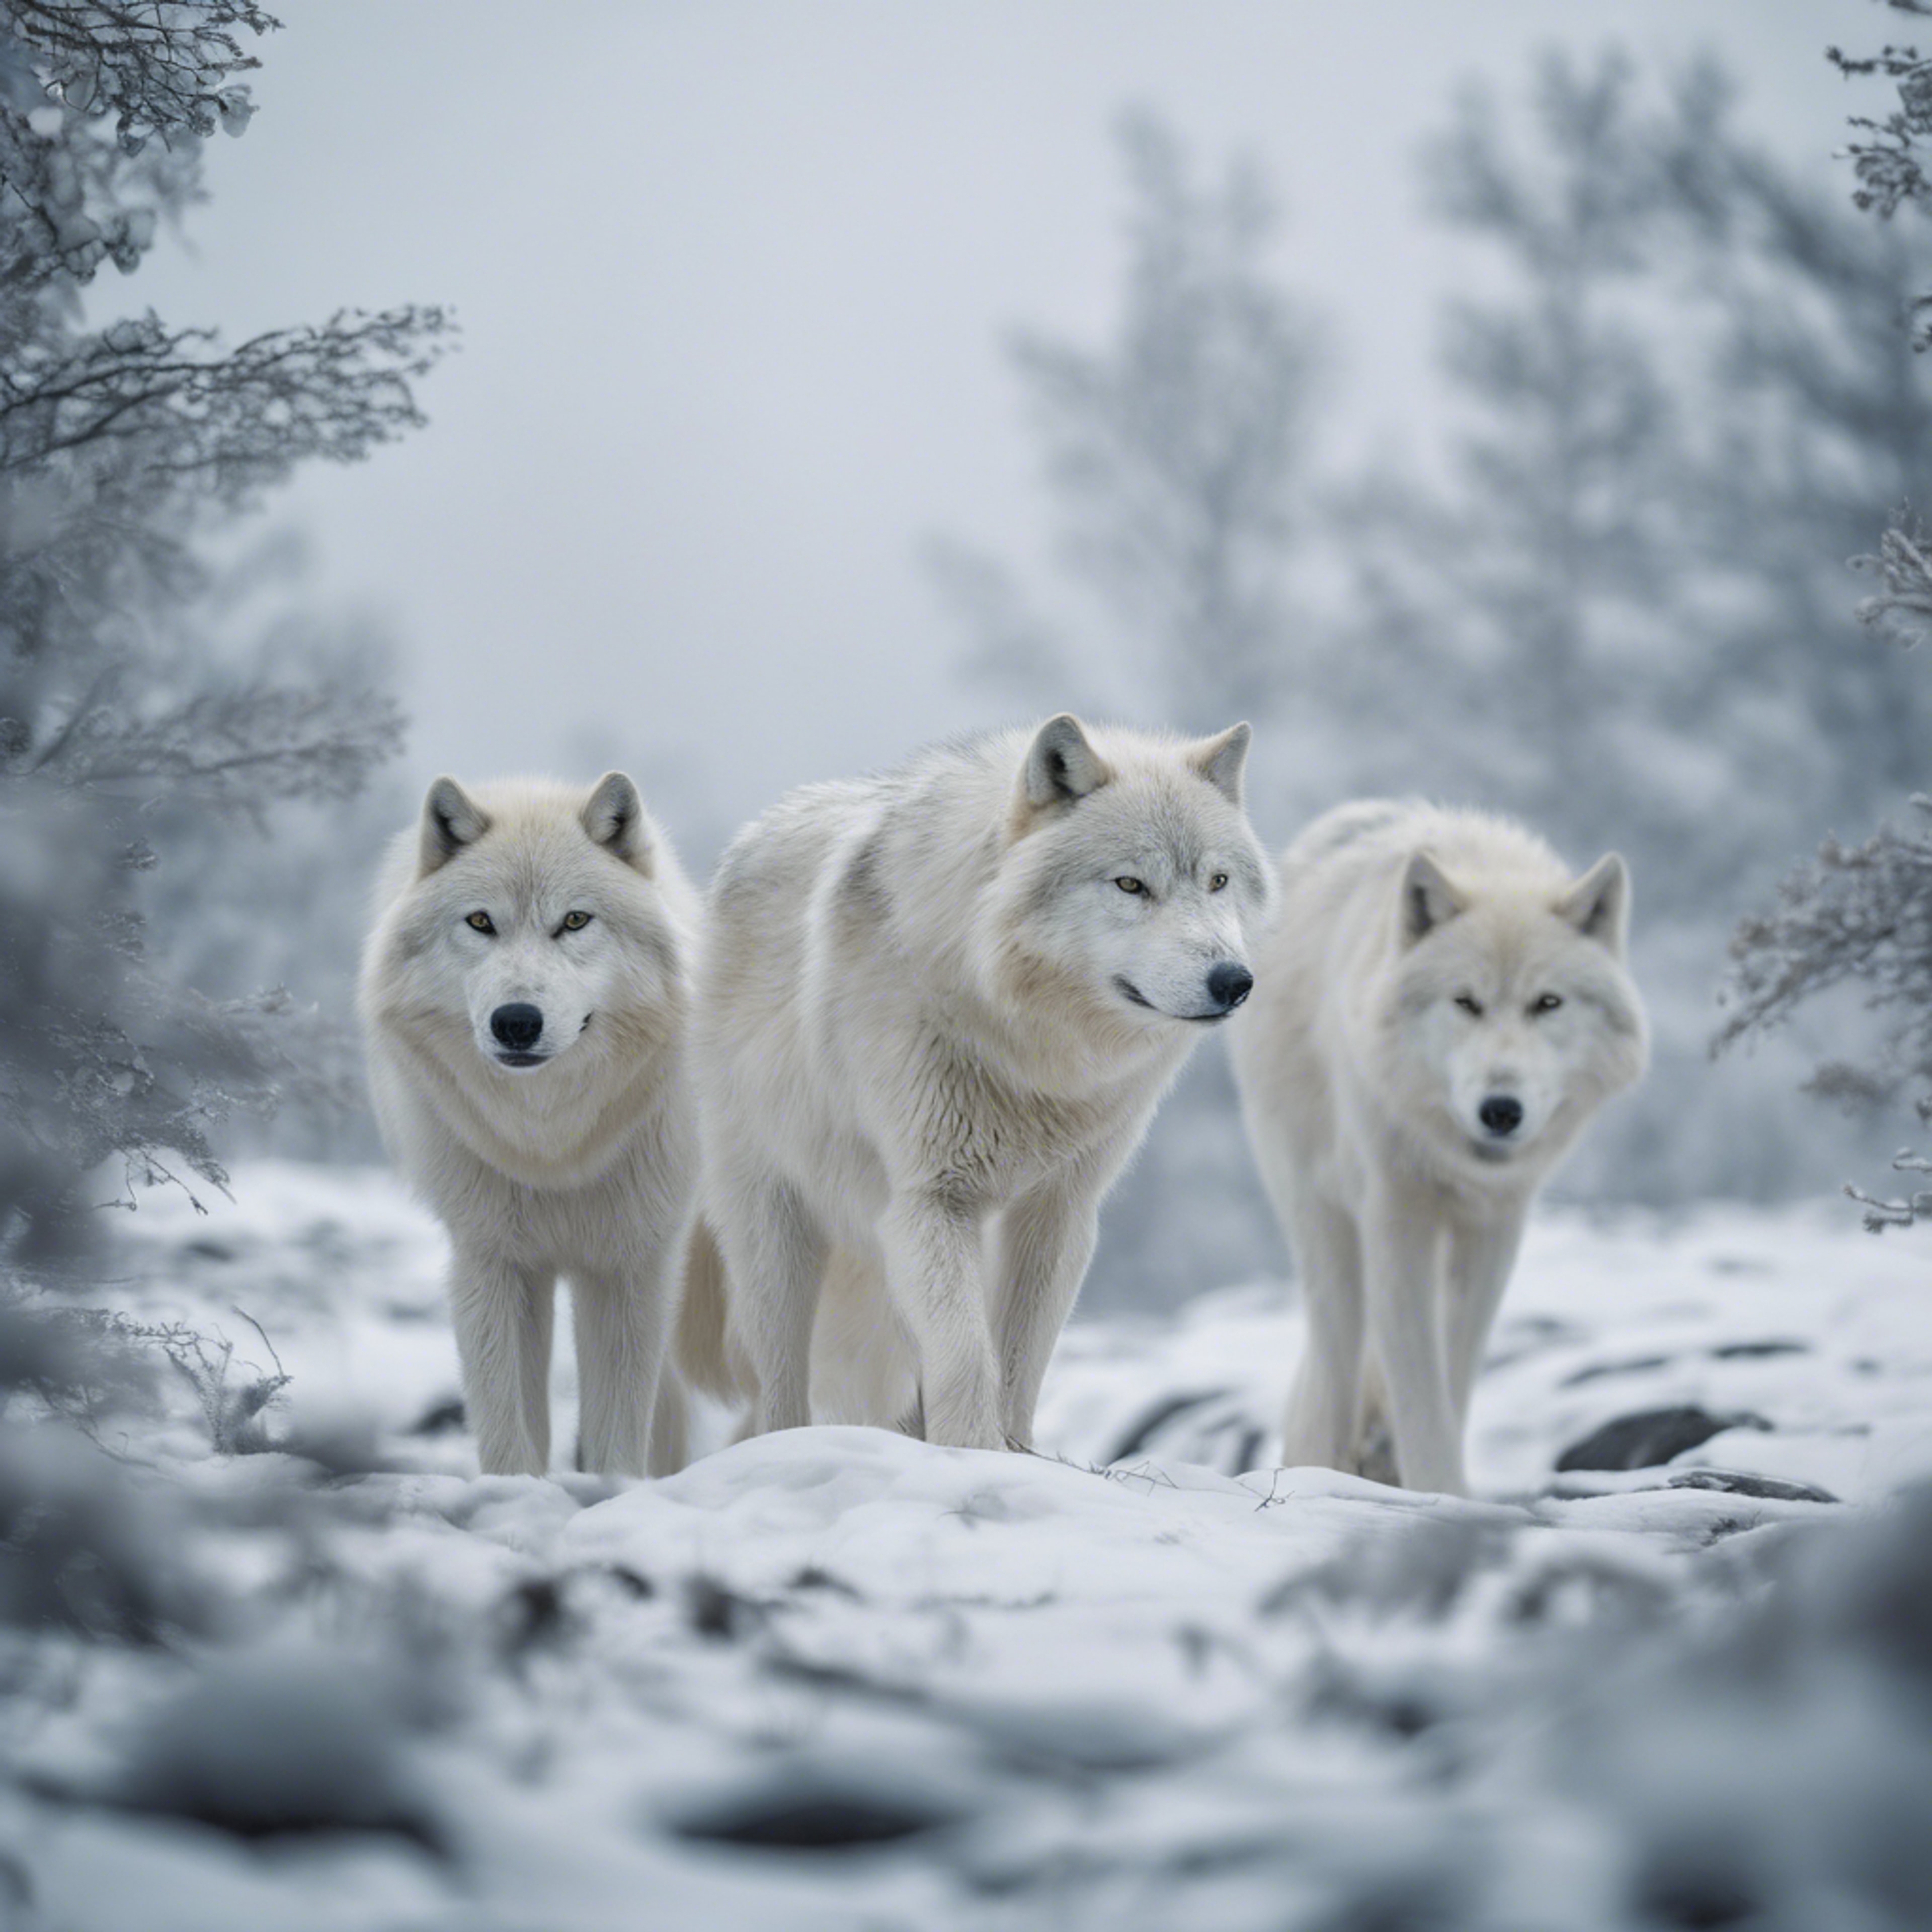 An Arctic landscape, a group of silver white wolves prowling in the misty white snow.壁紙[d8abdf0eee2a43a8a025]